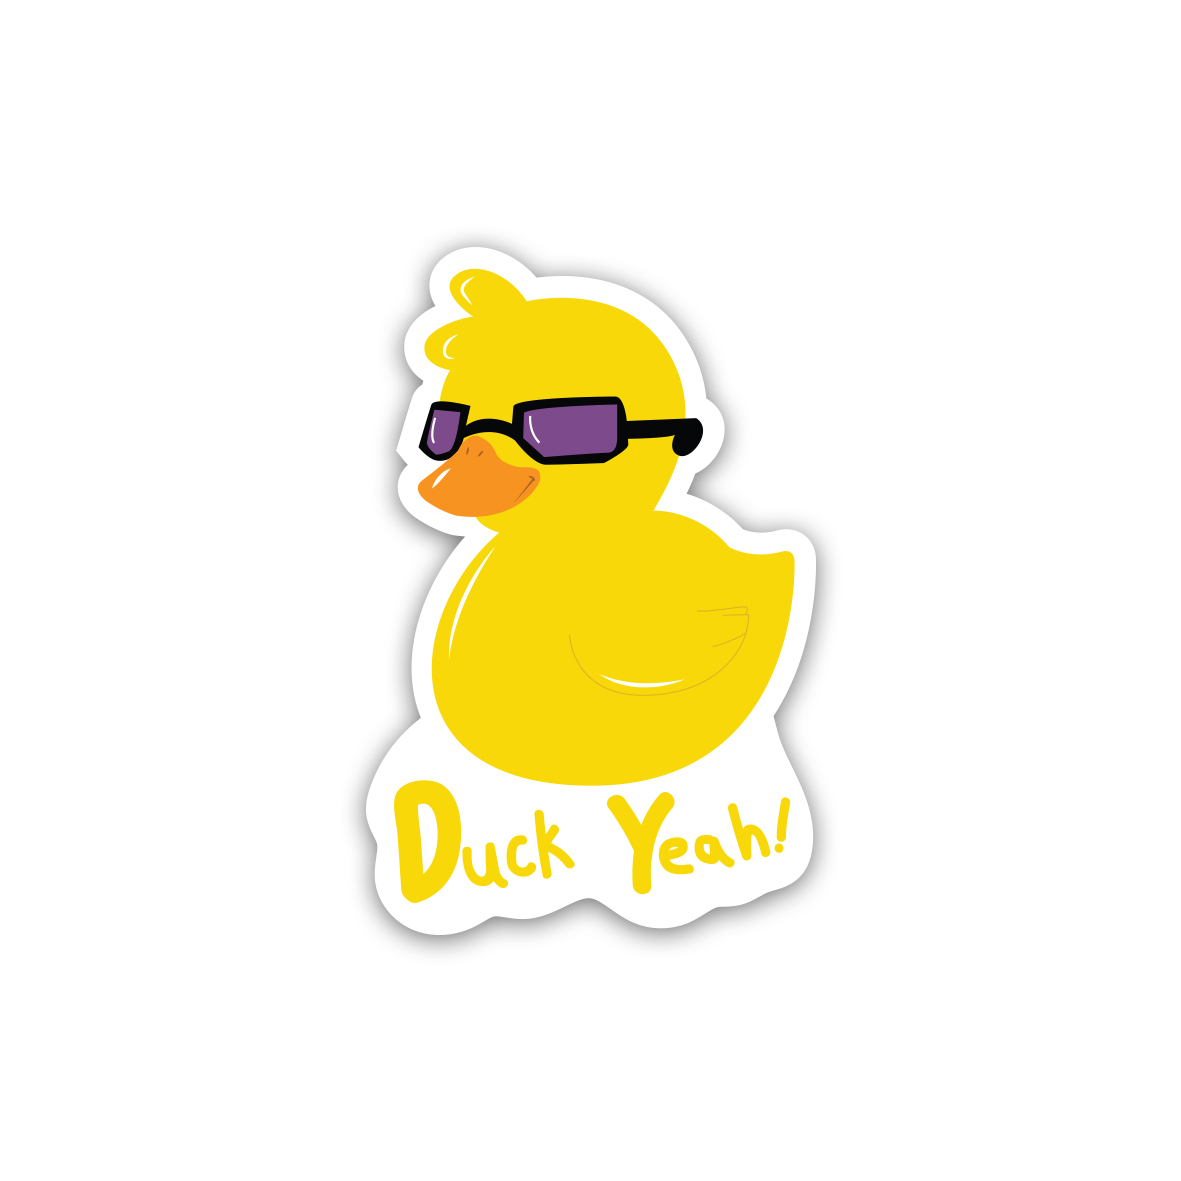 Duck you 😎